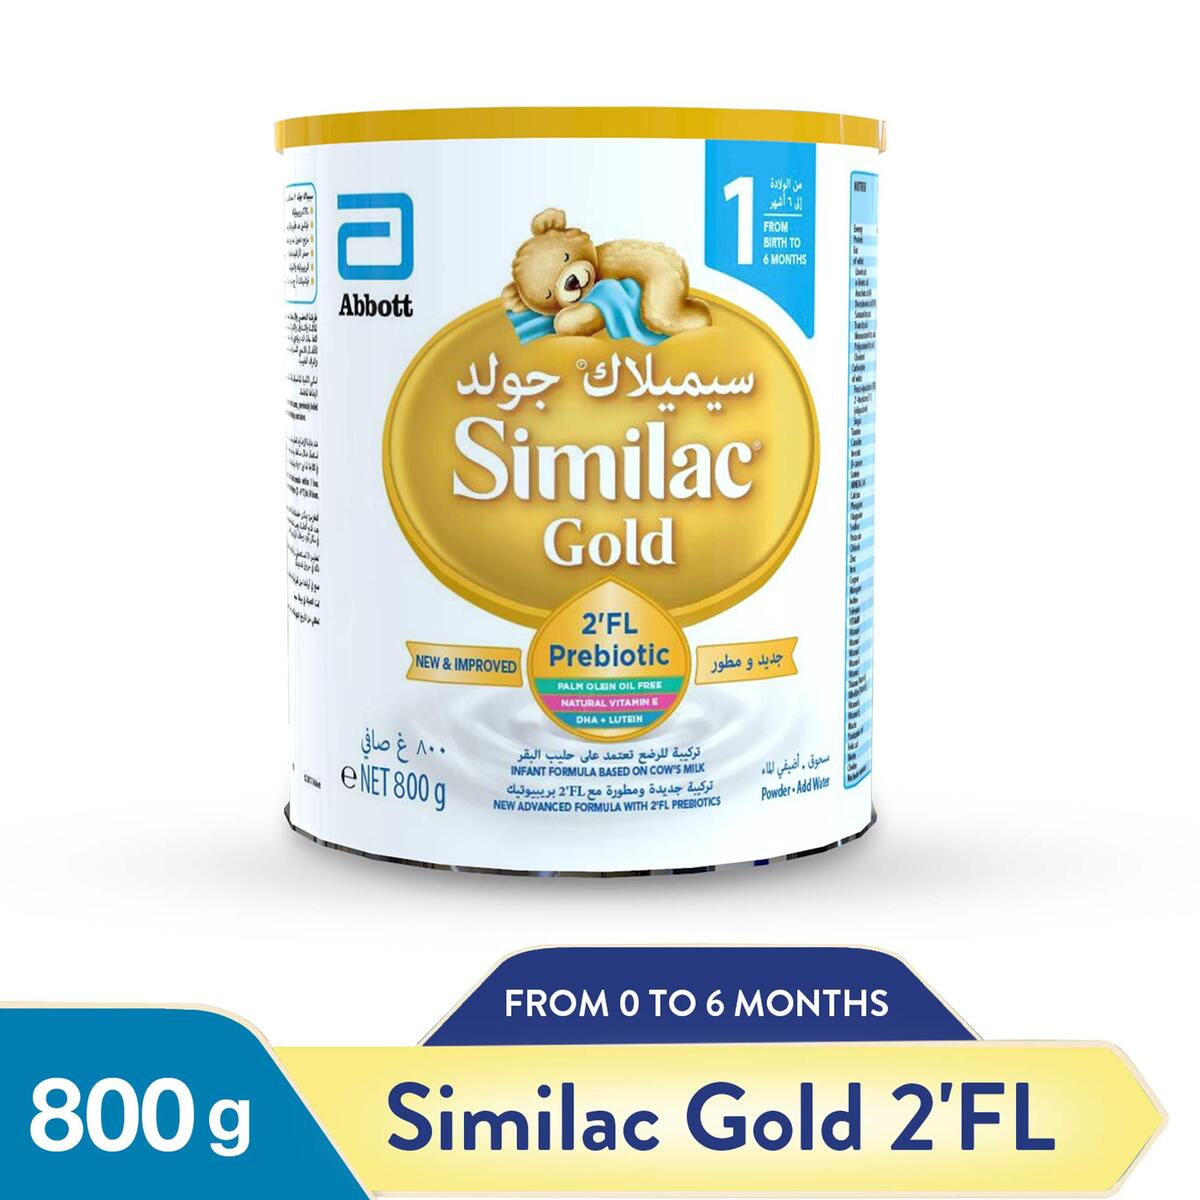 Buy Similac Gold New Advanced Infant Formula With 2FL Prebiotics Stage 1 From 0-6 Months 800 g Online at Best Price | Baby milk powders & formula | Lulu Kuwait in Kuwait